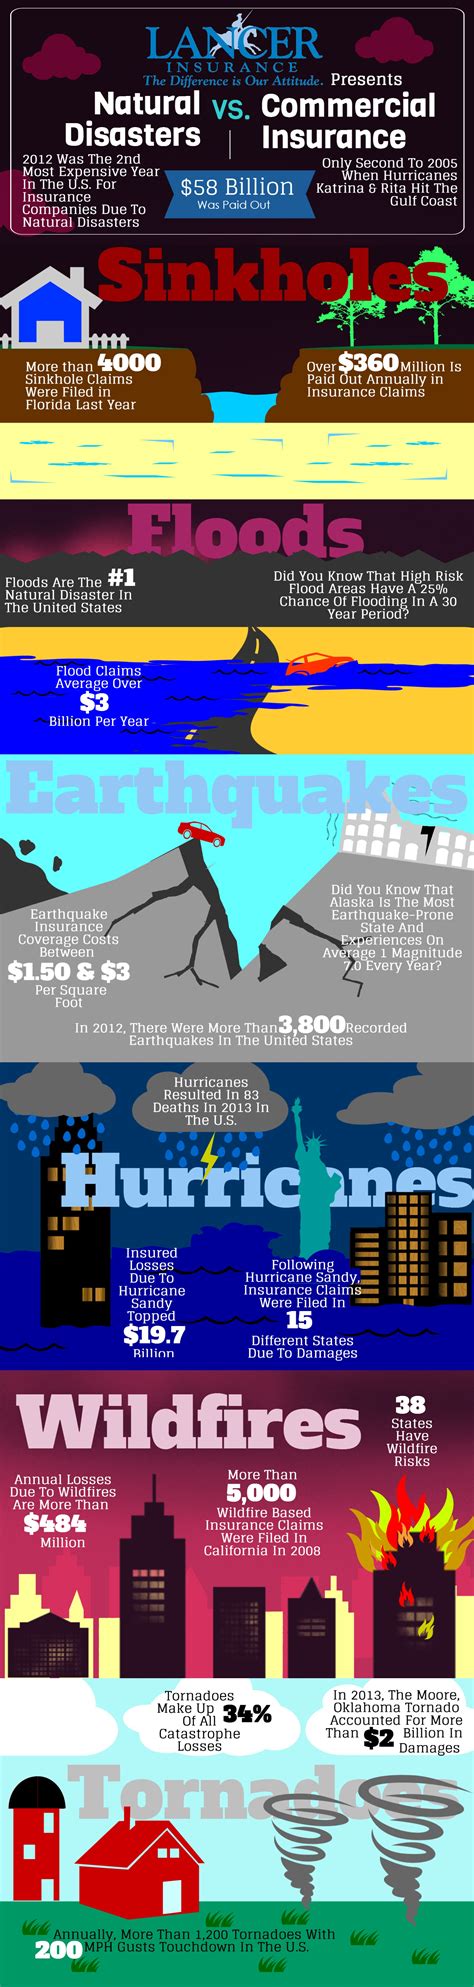 Natural Disasters VS Commercial Insurance [INFOGRAPHIC] #disasters #insurance - Infographic List